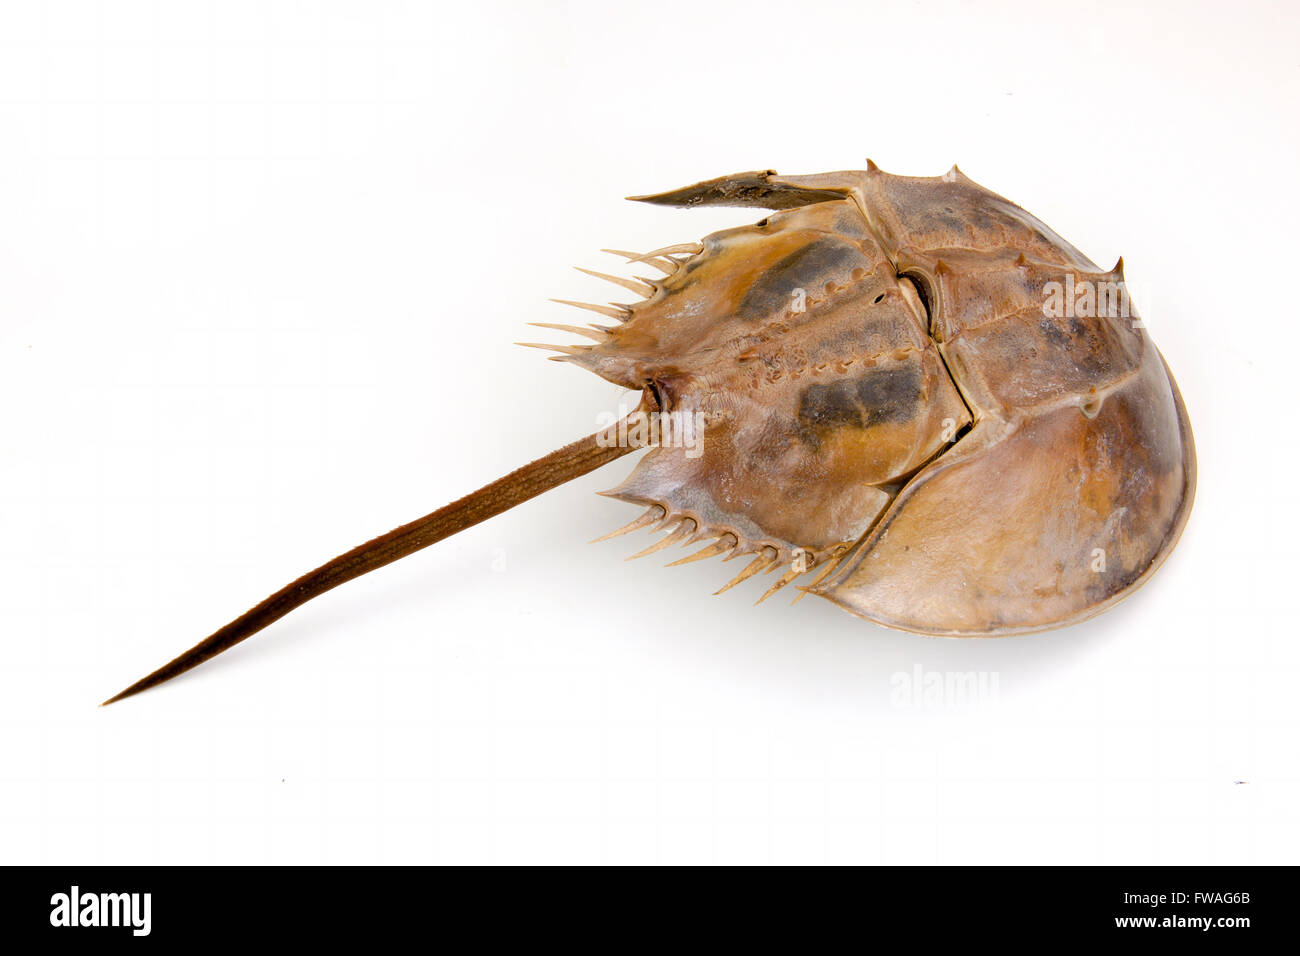 a large marine arthropod with a domed horseshoe-shaped shell, a long tail-spine, and ten legs. on isolated white background. Stock Photo